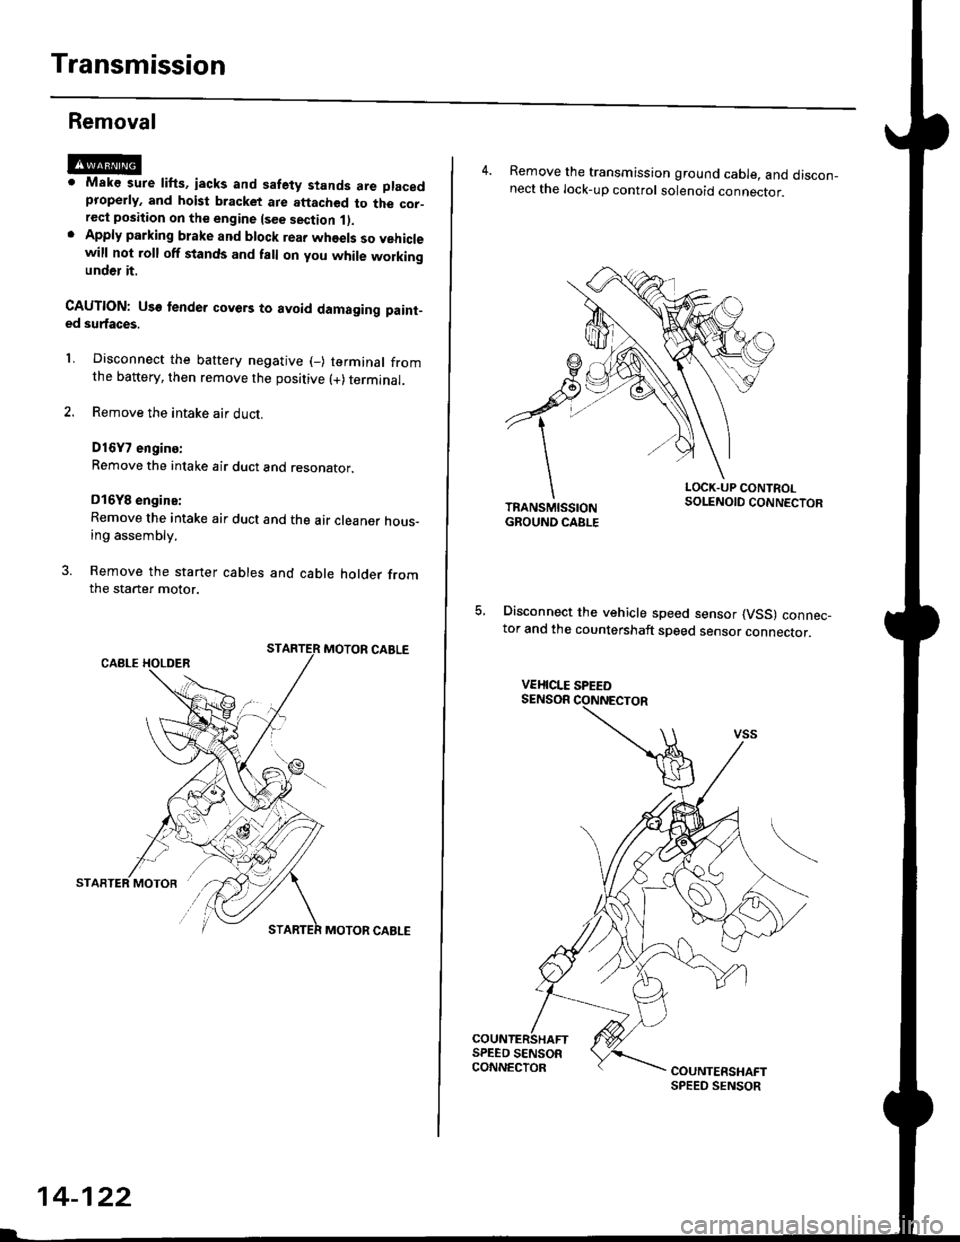 HONDA CIVIC 1996 6.G Workshop Manual Transmission
Removal
@Maks sure lifts, iacks and safety stands are placedproperly, and hoist bracket ate aftached to the cor_rec{ position on the engine lsee section 1).Apply parking brake and block r